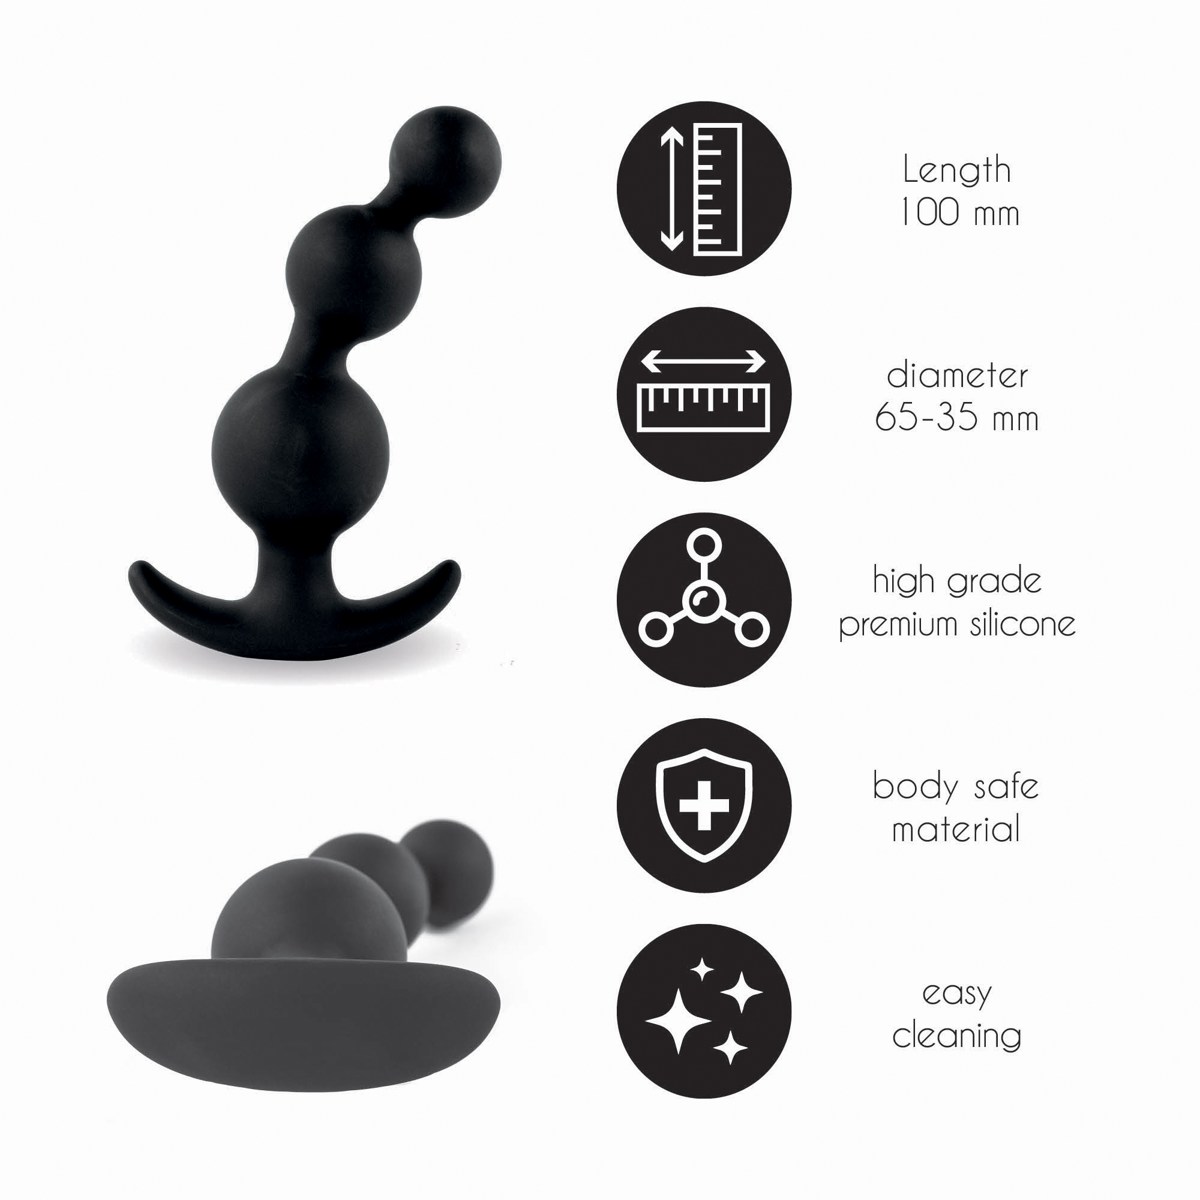 Misure - Anal Beads in silicone premium Plugz by Feelztoys